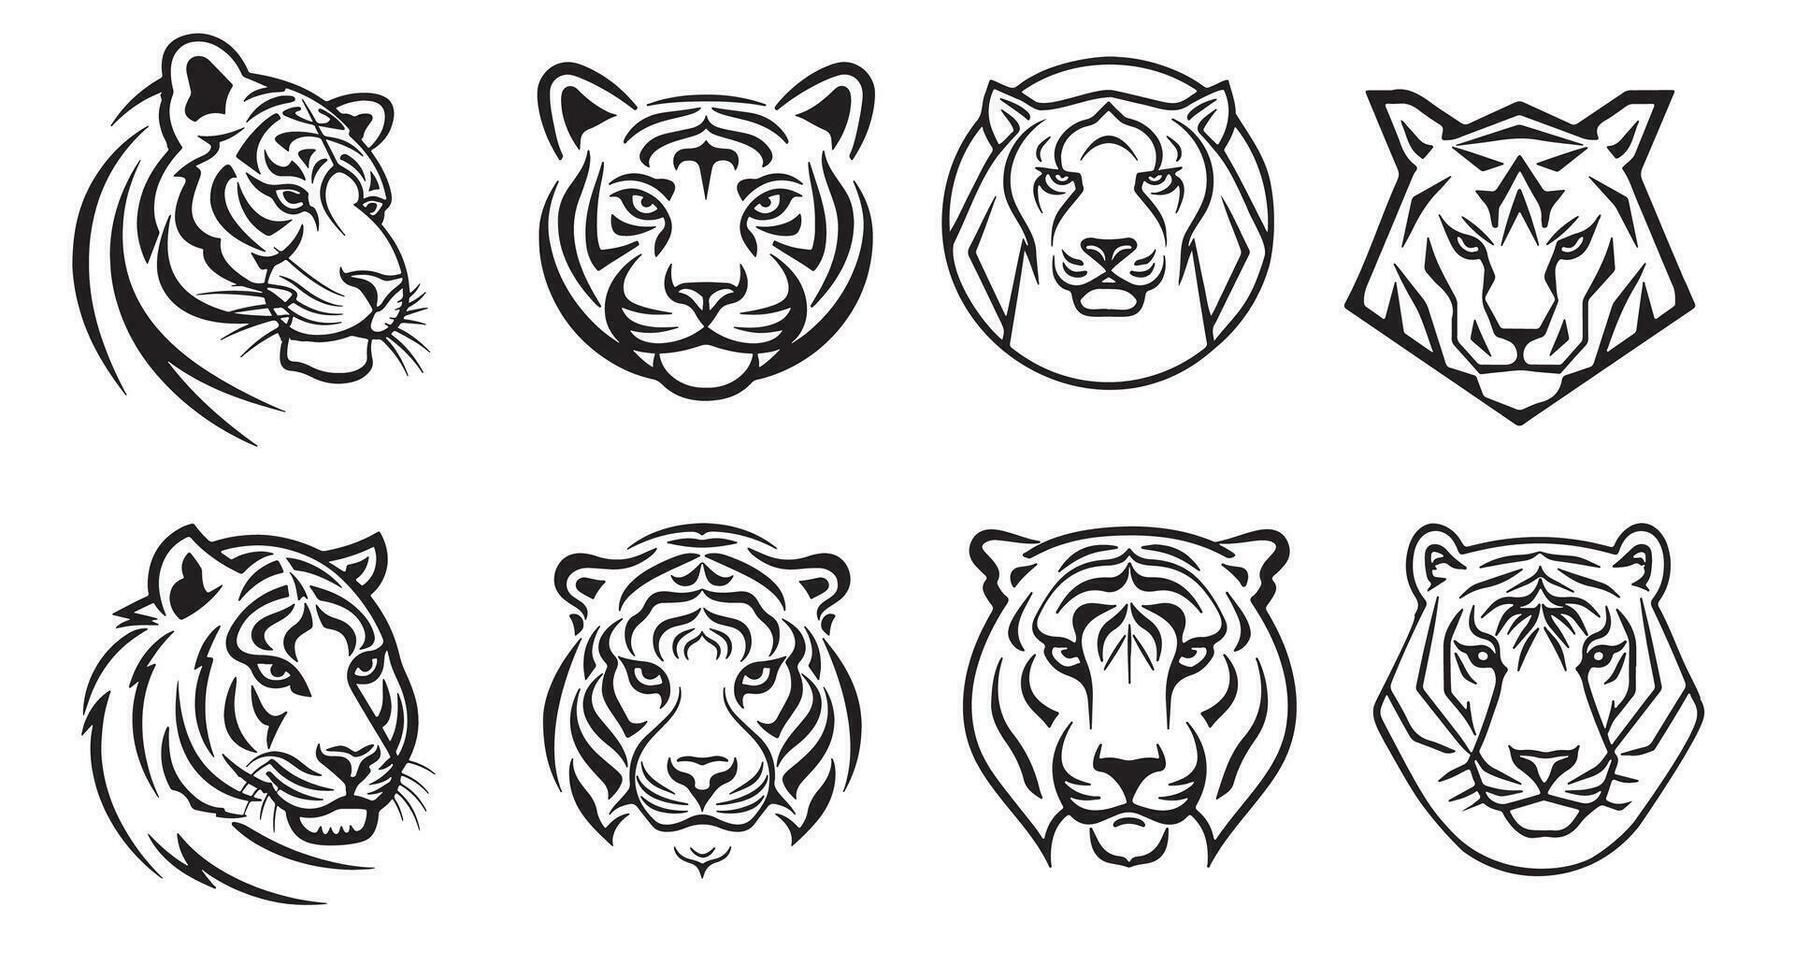 Tiger head collection logo sketch hand drawn in doodle style Vector illustration